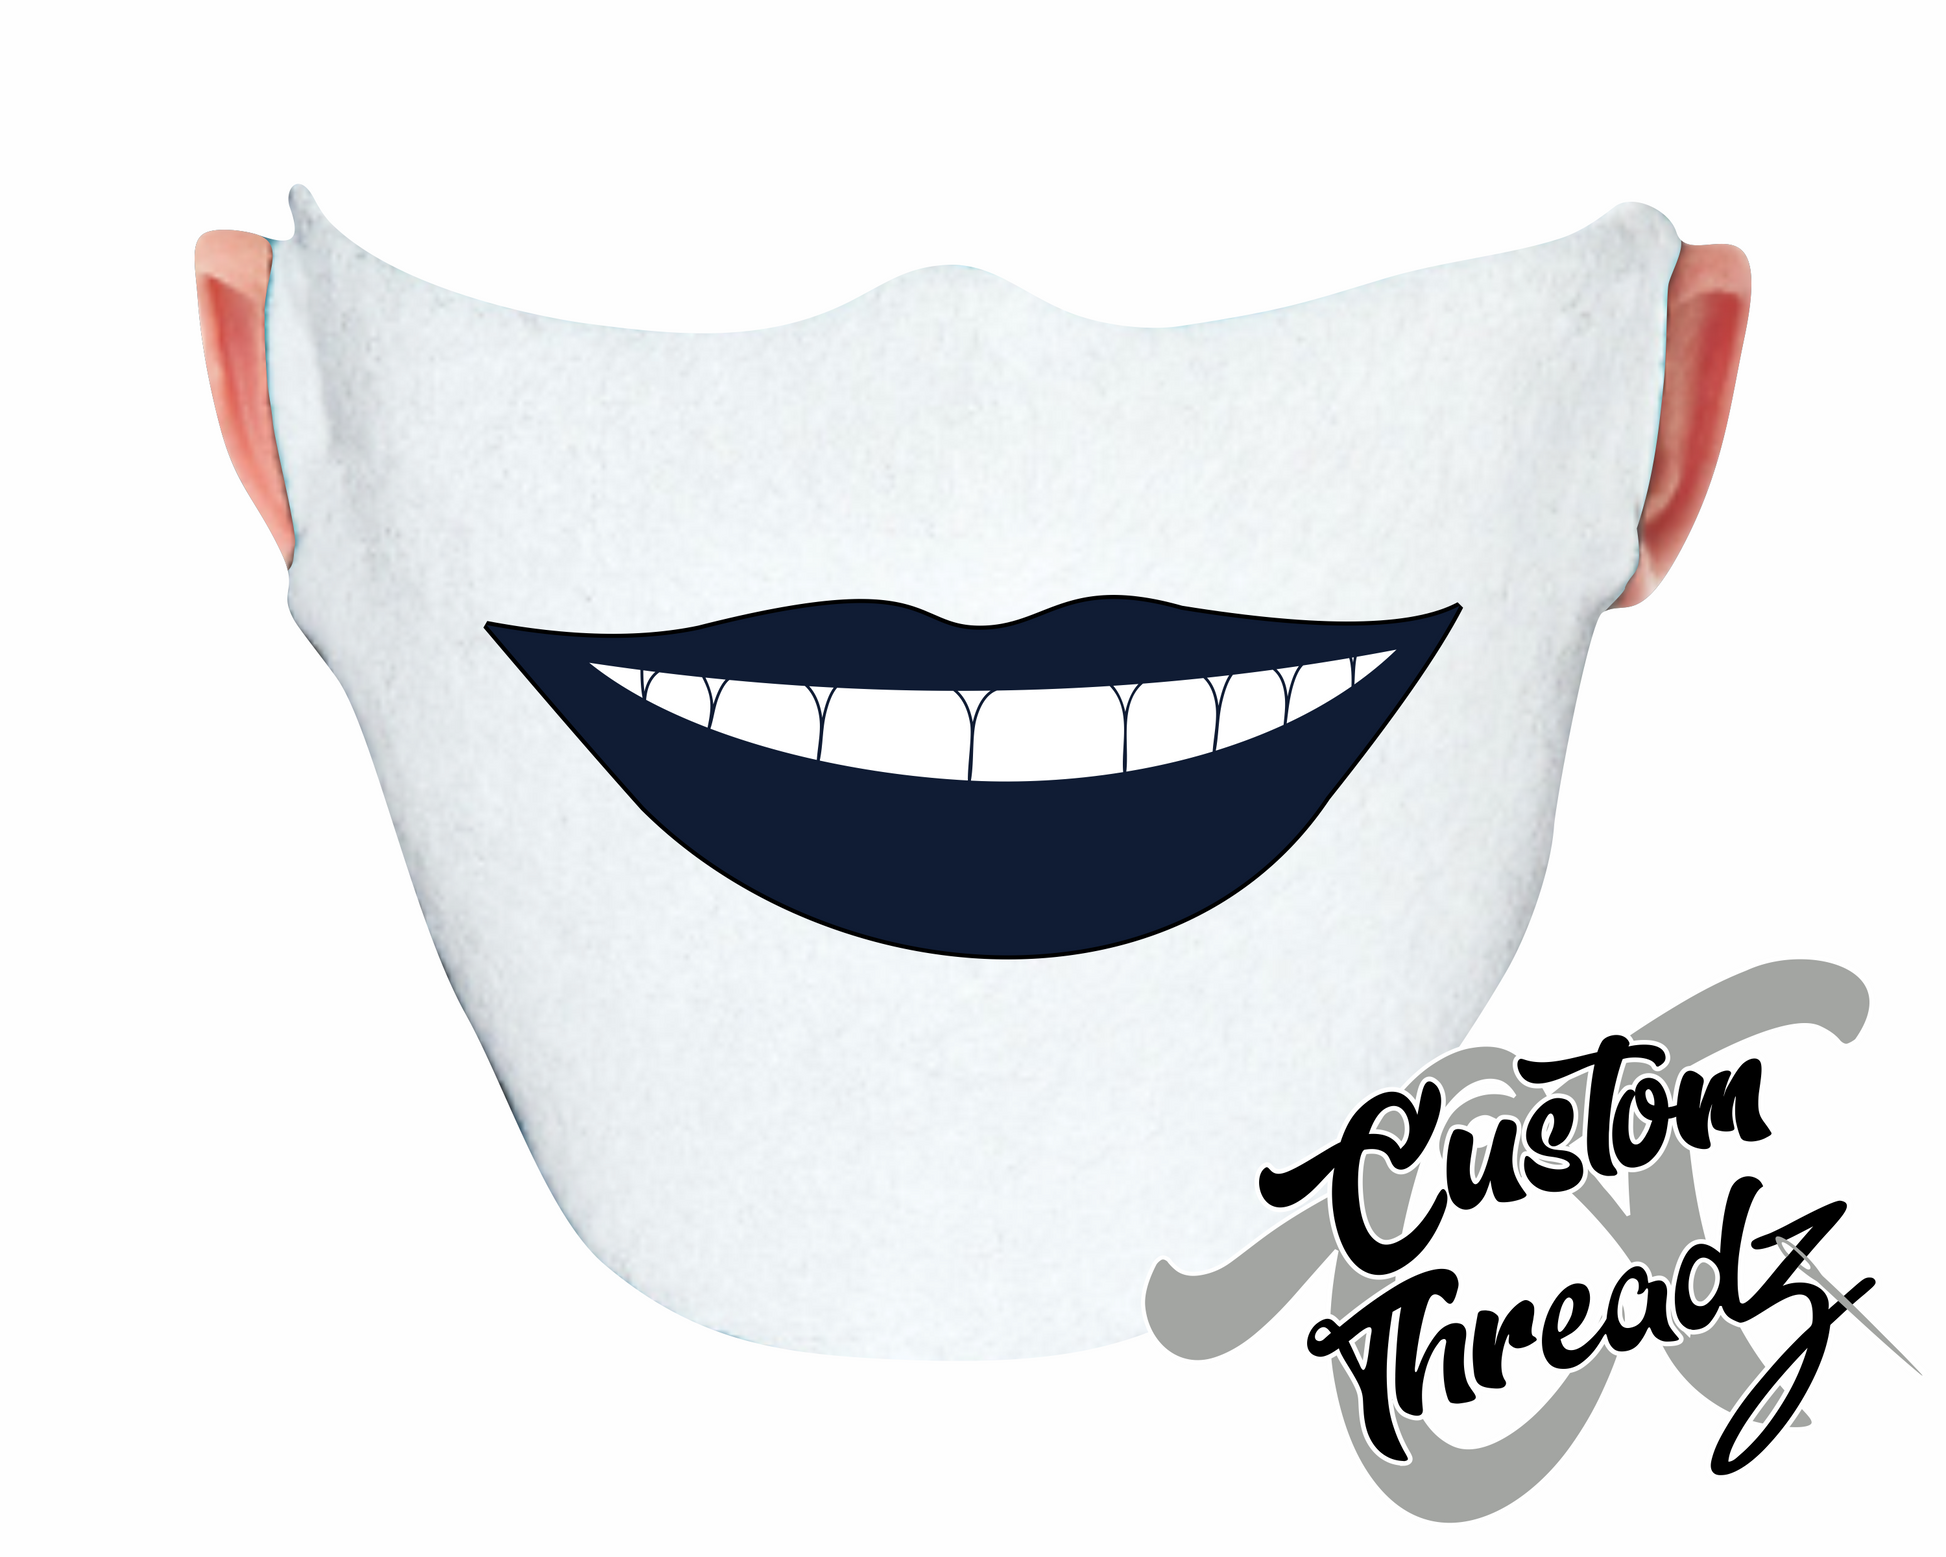 white face mask with say cheese lips smiling showing teeth DTG printed design